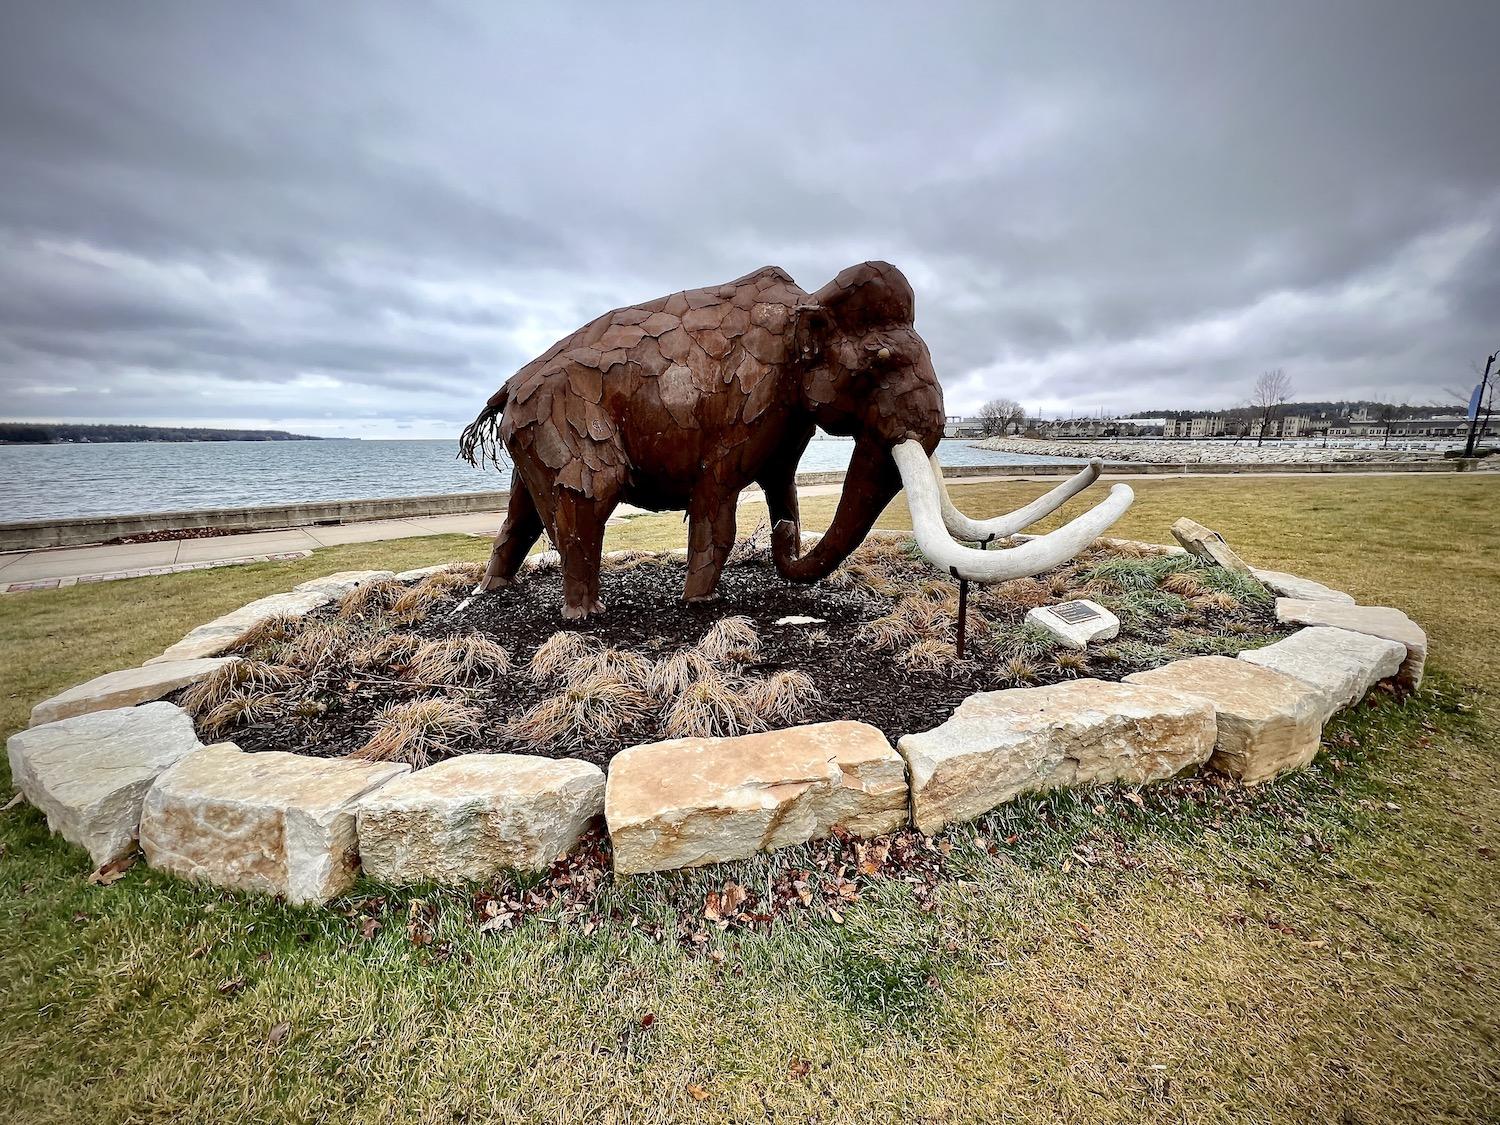 Green Bay sculptor Carl Vanderheyden's "Woolly" statue is in Bayview Park in Sturgeon Bay, an Ice Age Trail Community near the eastern terminus of the trail.